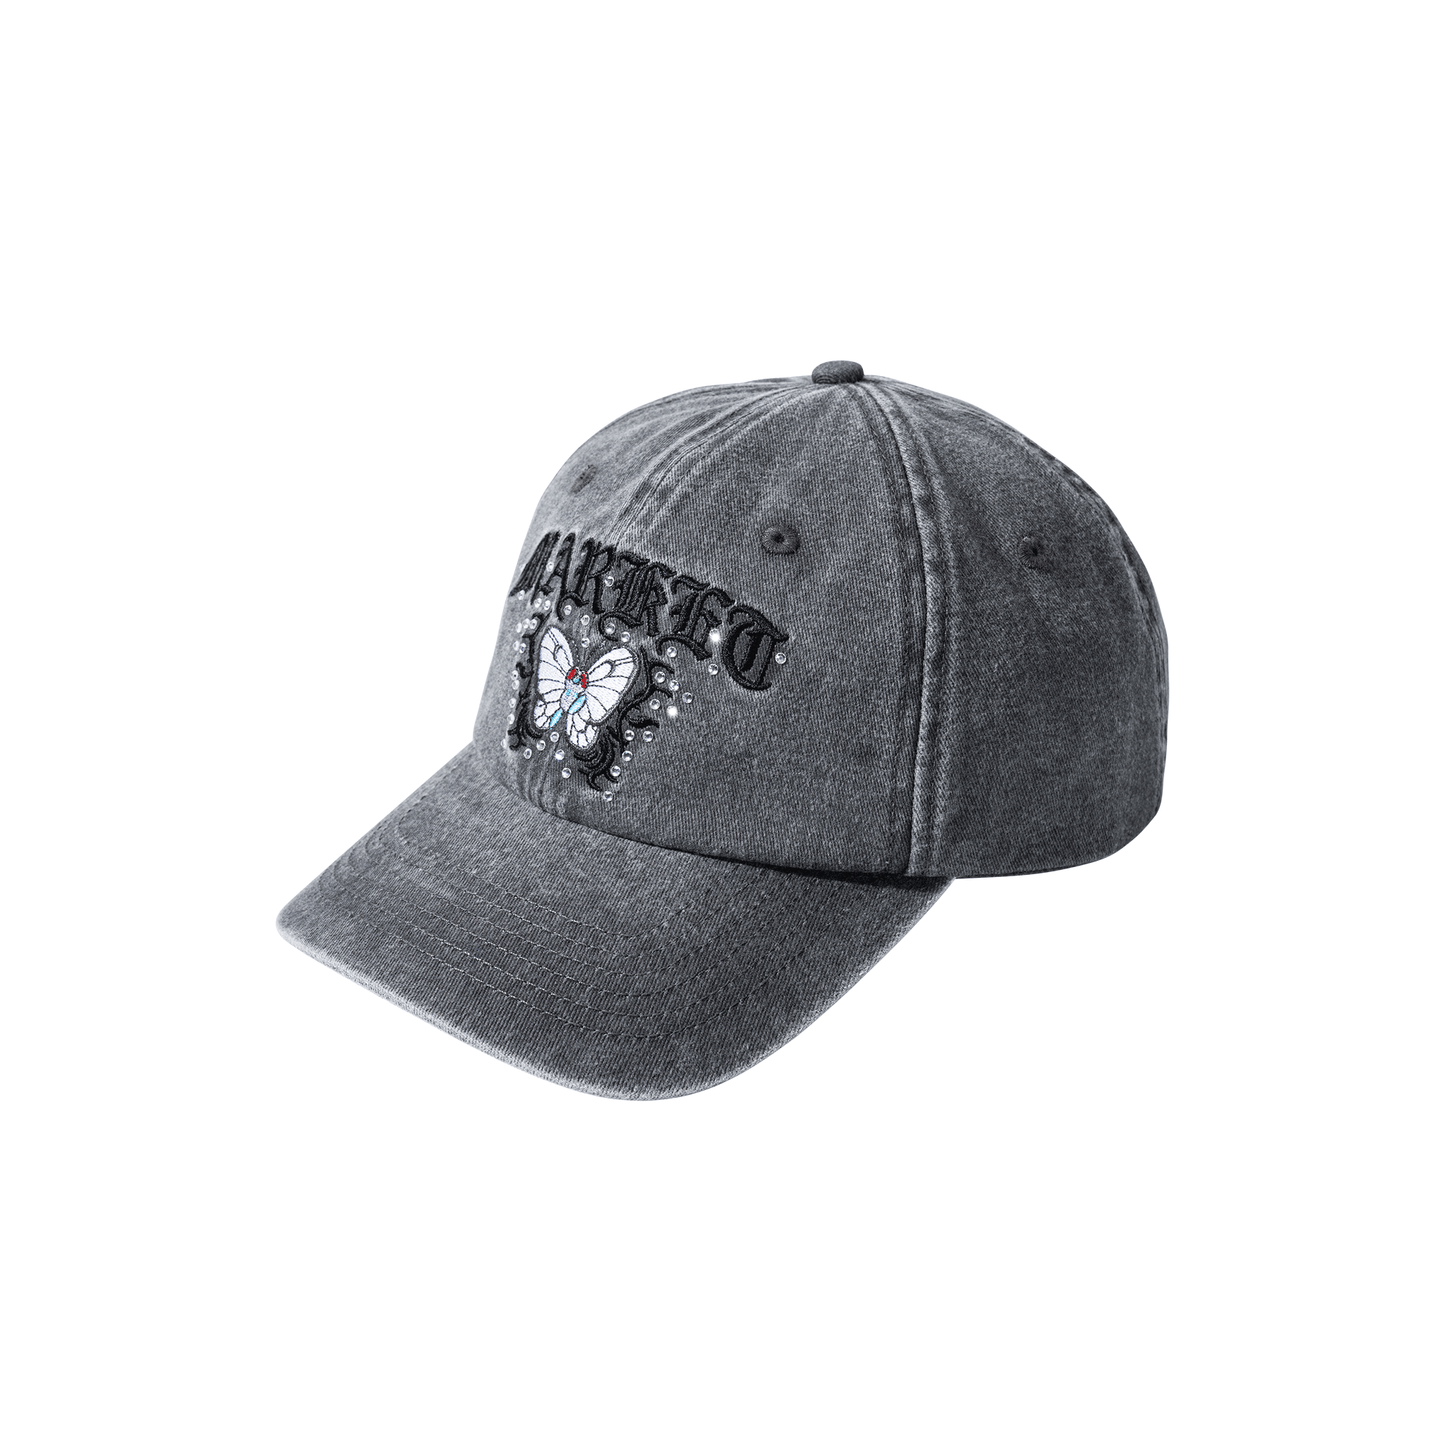 BUTTERFREE 6-PANEL HAT